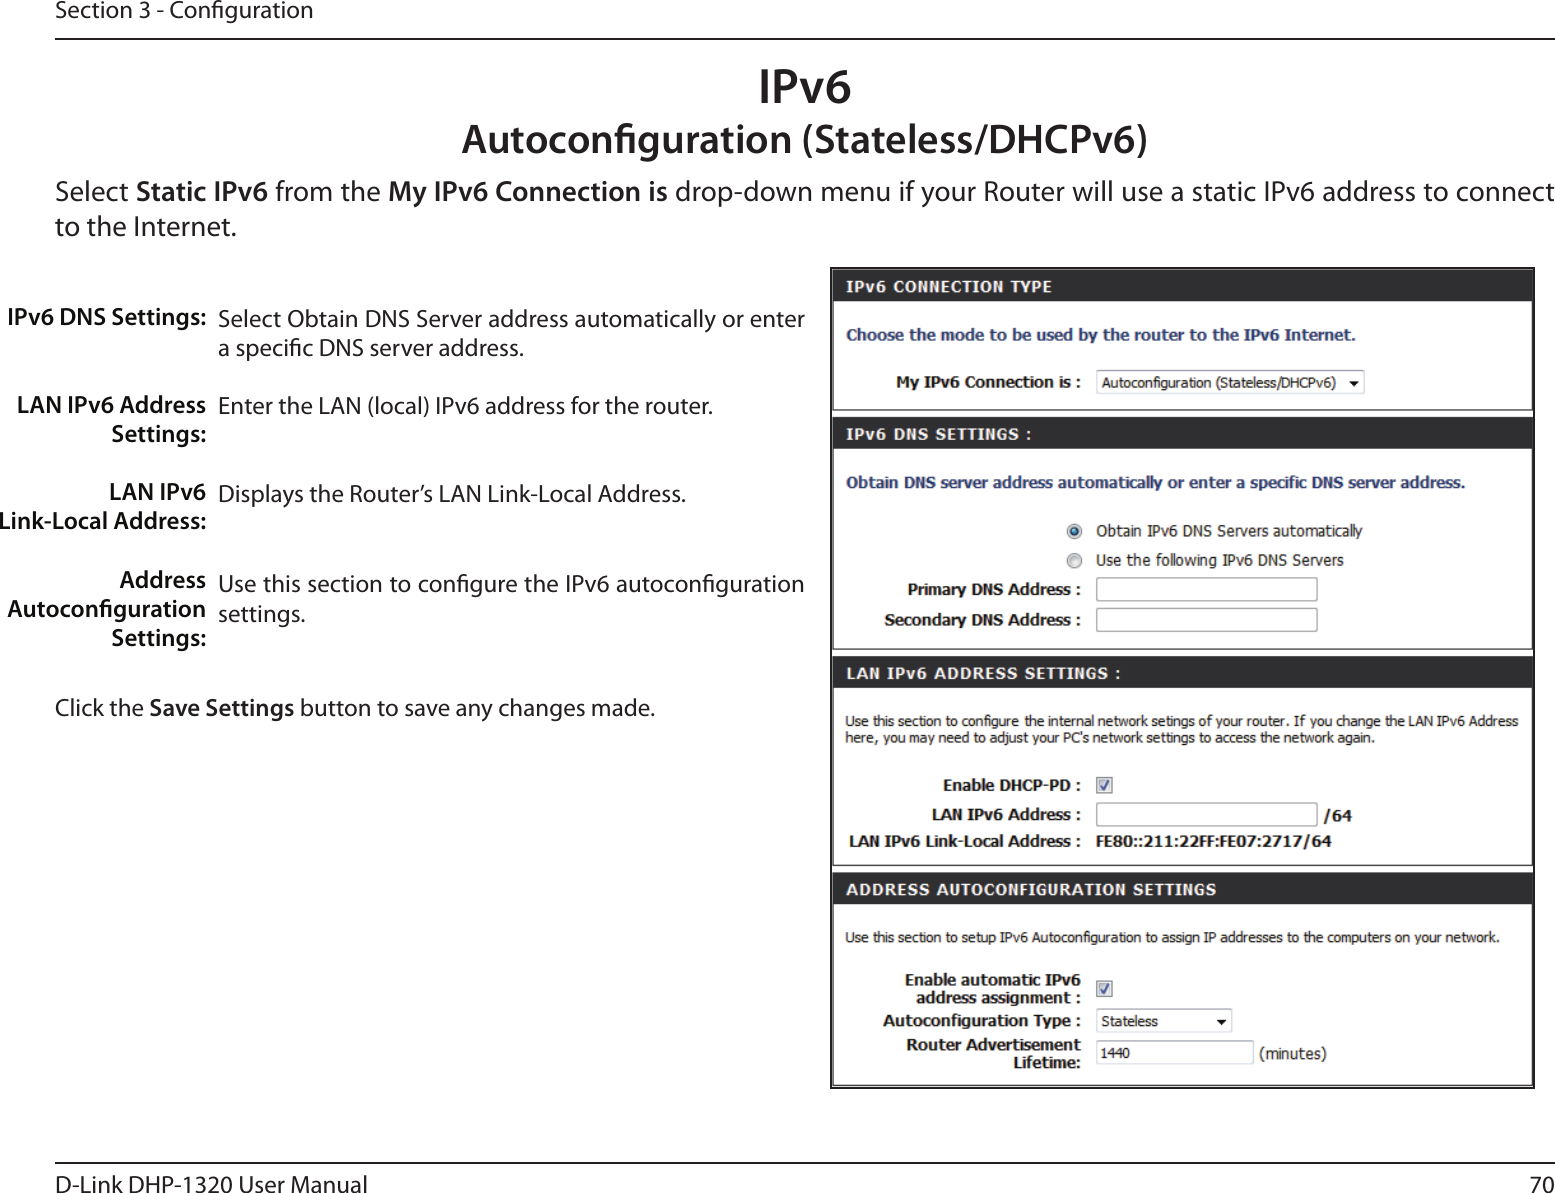 70D-Link DHP-1320 User ManualSection 3 - CongurationIPv6Autoconguration (Stateless/DHCPv6)Select Static IPv6 from the My IPv6 Connection is drop-down menu if your Router will use a static IPv6 address to connect to the Internet.Select Obtain DNS Server address automatically or enter a specic DNS server address. Enter the LAN (local) IPv6 address for the router. Displays the Router’s LAN Link-Local Address.Use this section to congure the IPv6 autoconguration settings.IPv6 DNS Settings:LAN IPv6 Address Settings:LAN IPv6  Link-Local Address:Address Autoconguration Settings:Click the Save Settings button to save any changes made.